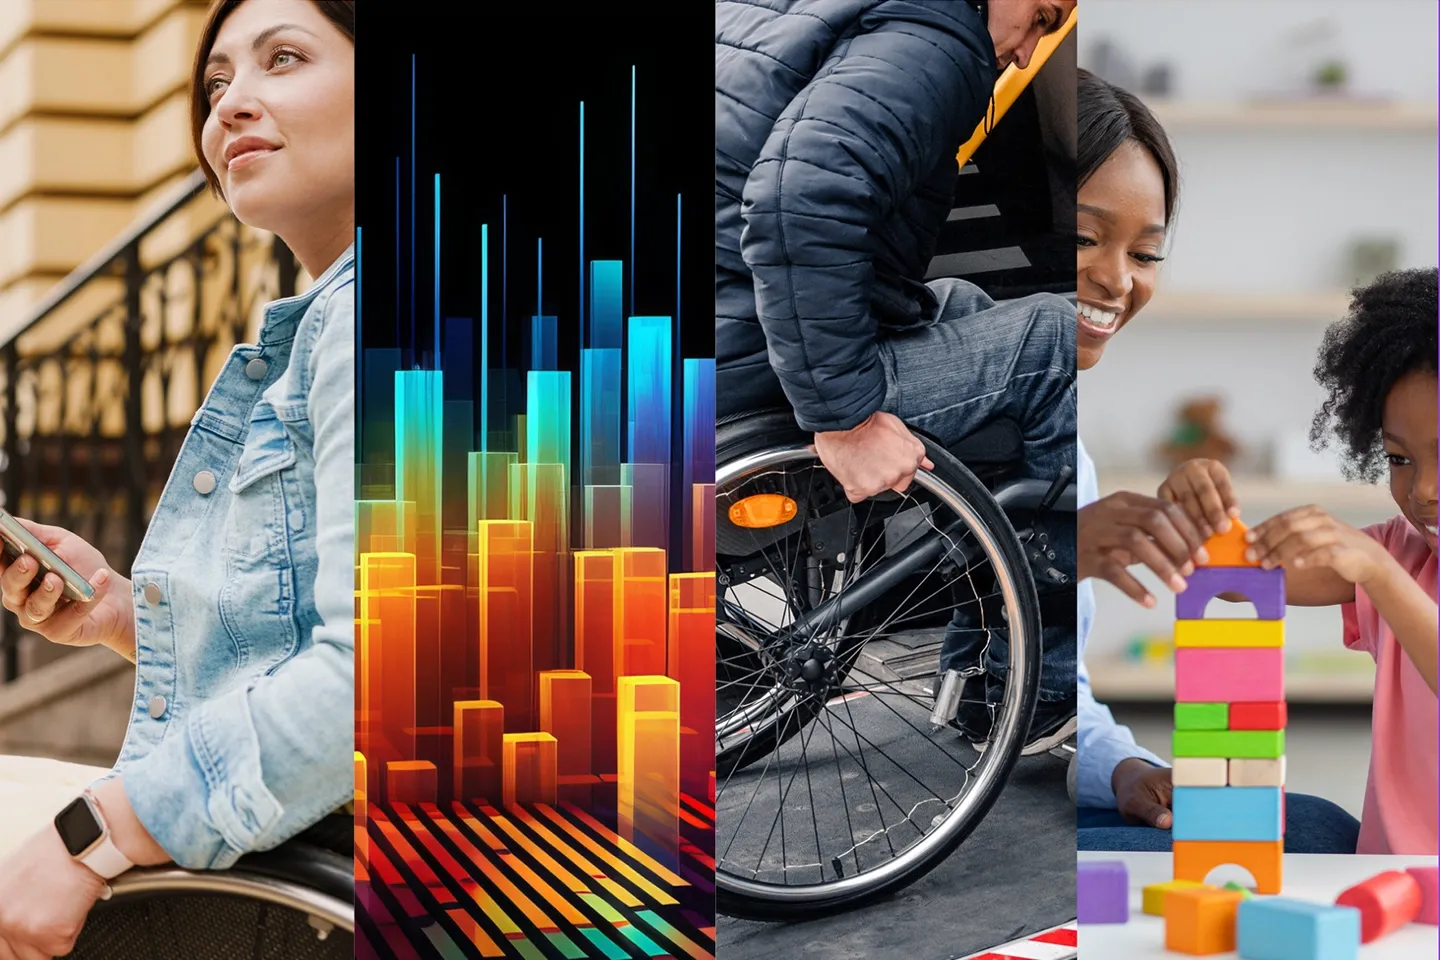 Four-picture collage of wheelchair user with phone, rainbow colored graph, wheelchair user going up ramp, child and caretaker playing with blocks.